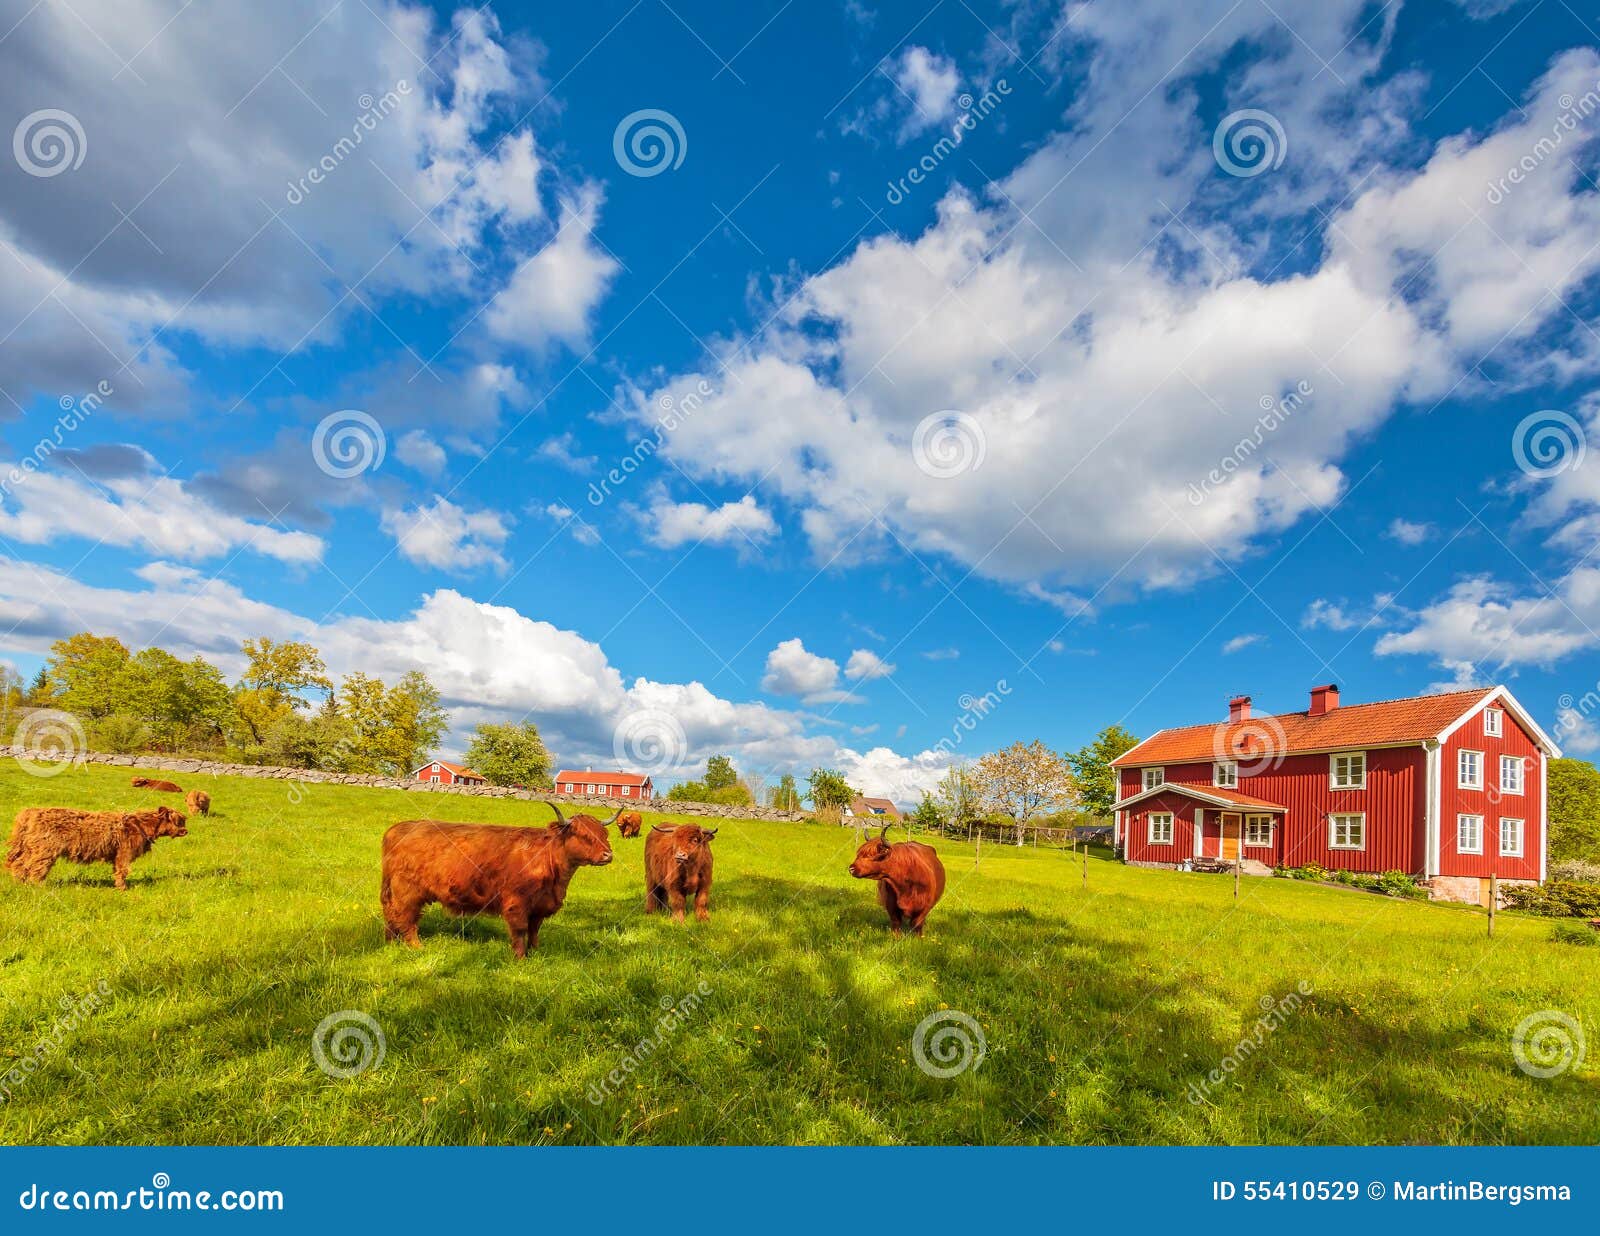 highland cows and old farm houses in smaland, sweden